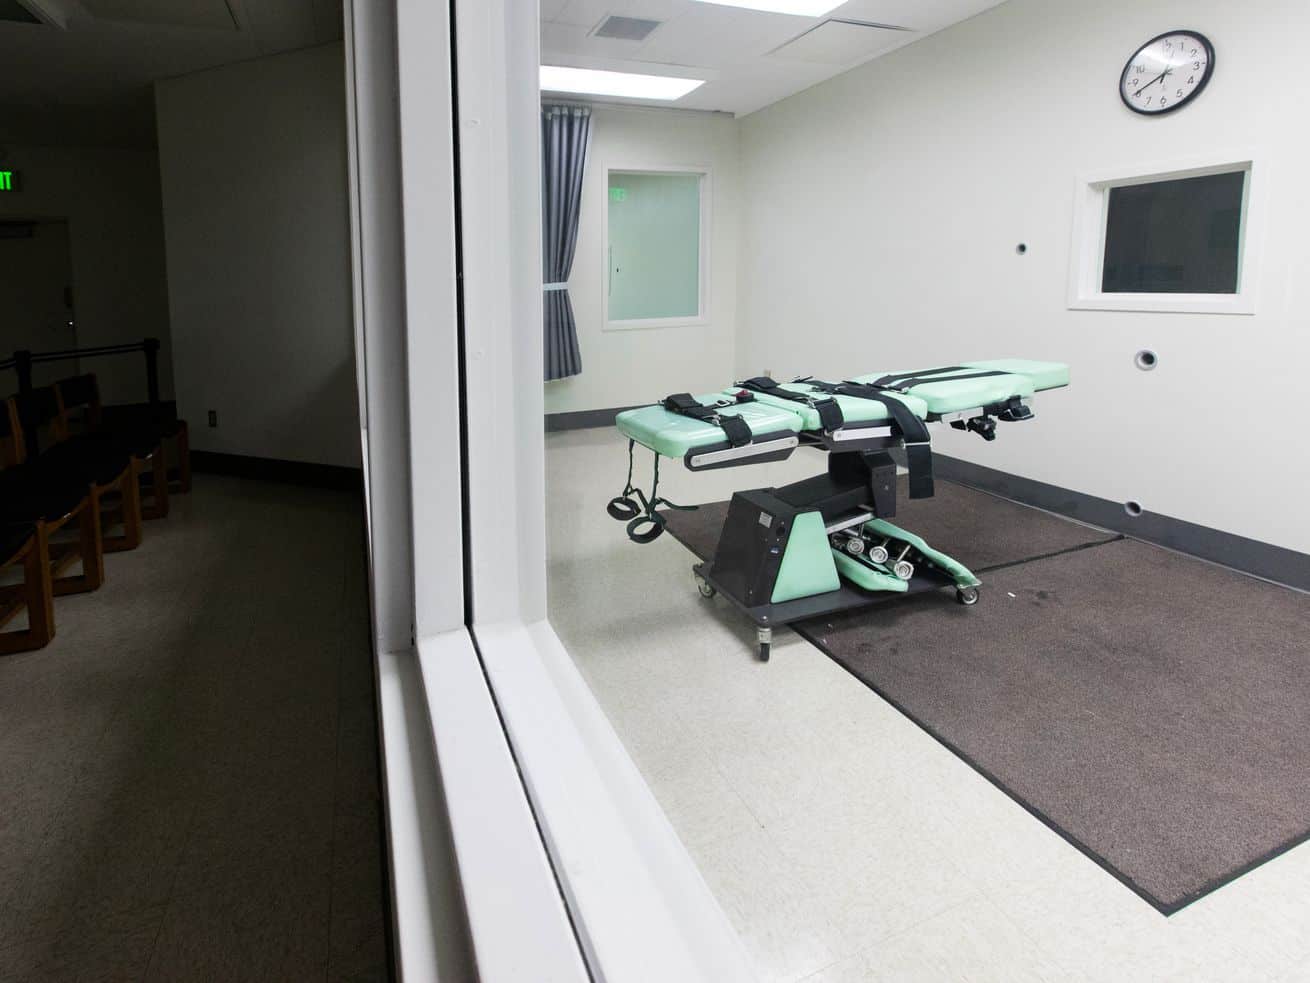 The Supreme Court just backed away from one of its cruelest death penalty decisions